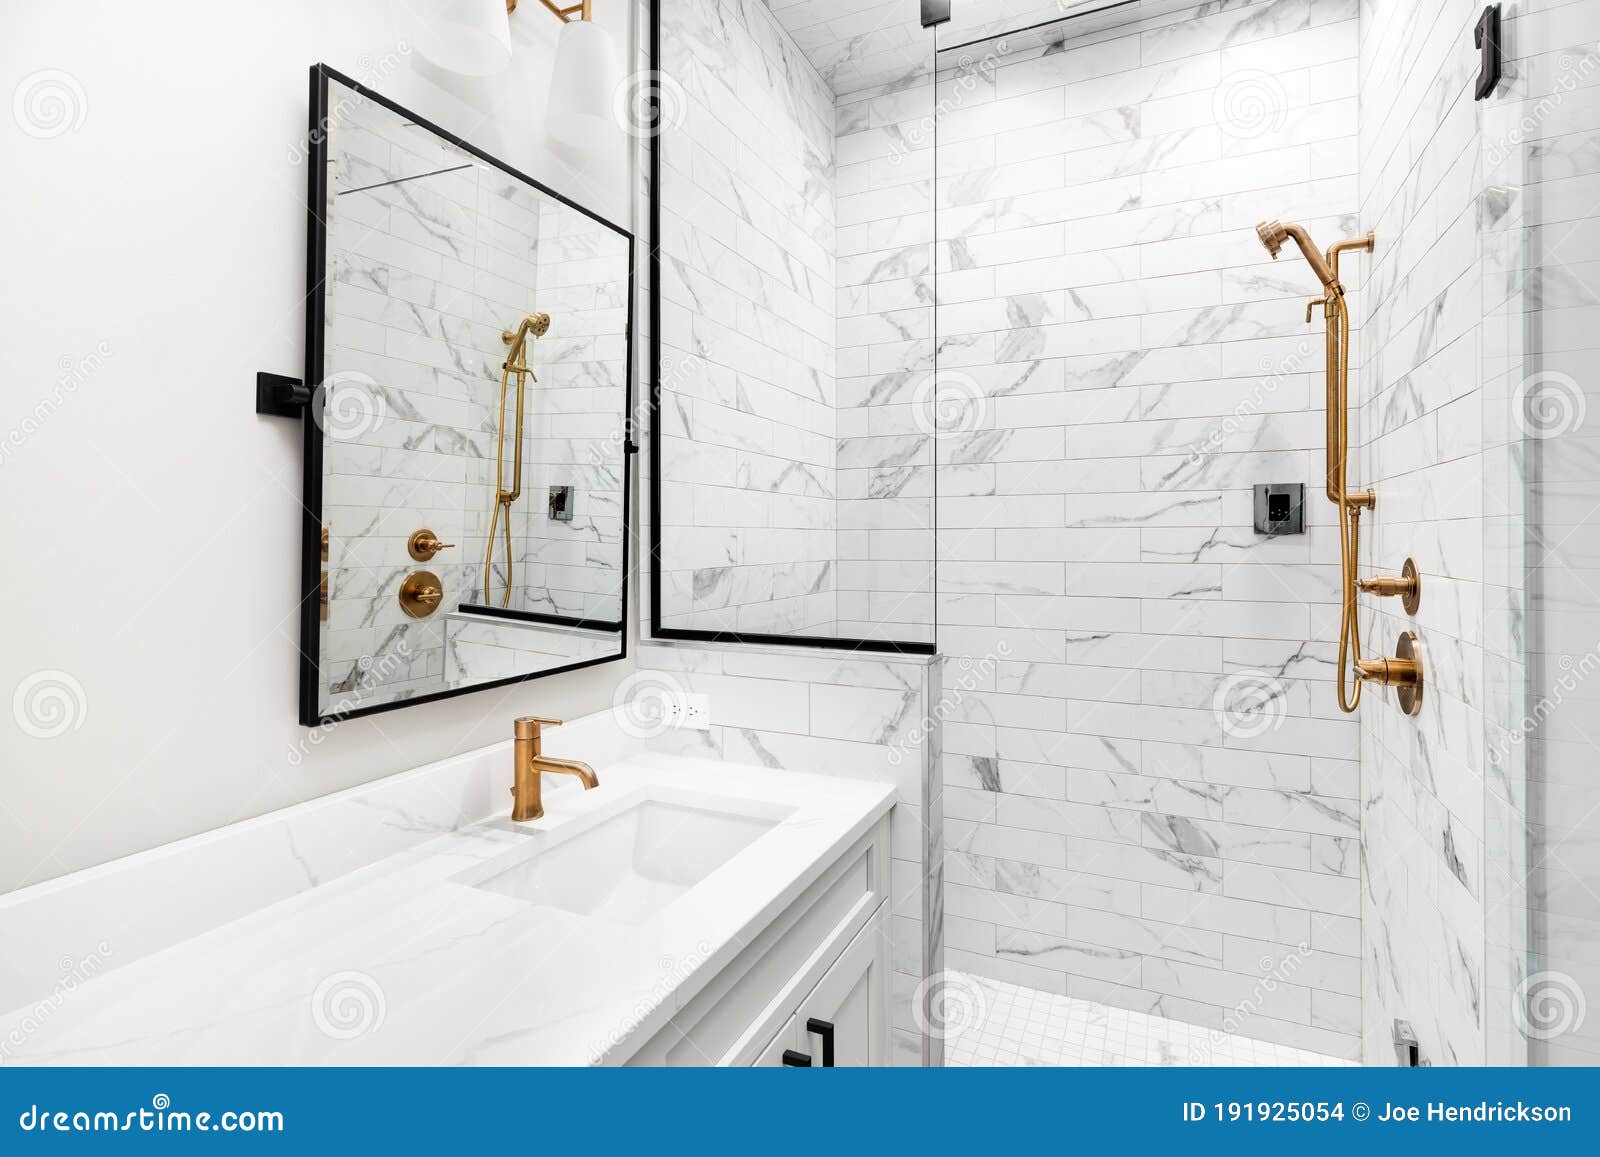 A Modern, Luxury White Bathroom with Gold Hardware. Editorial Stock ...